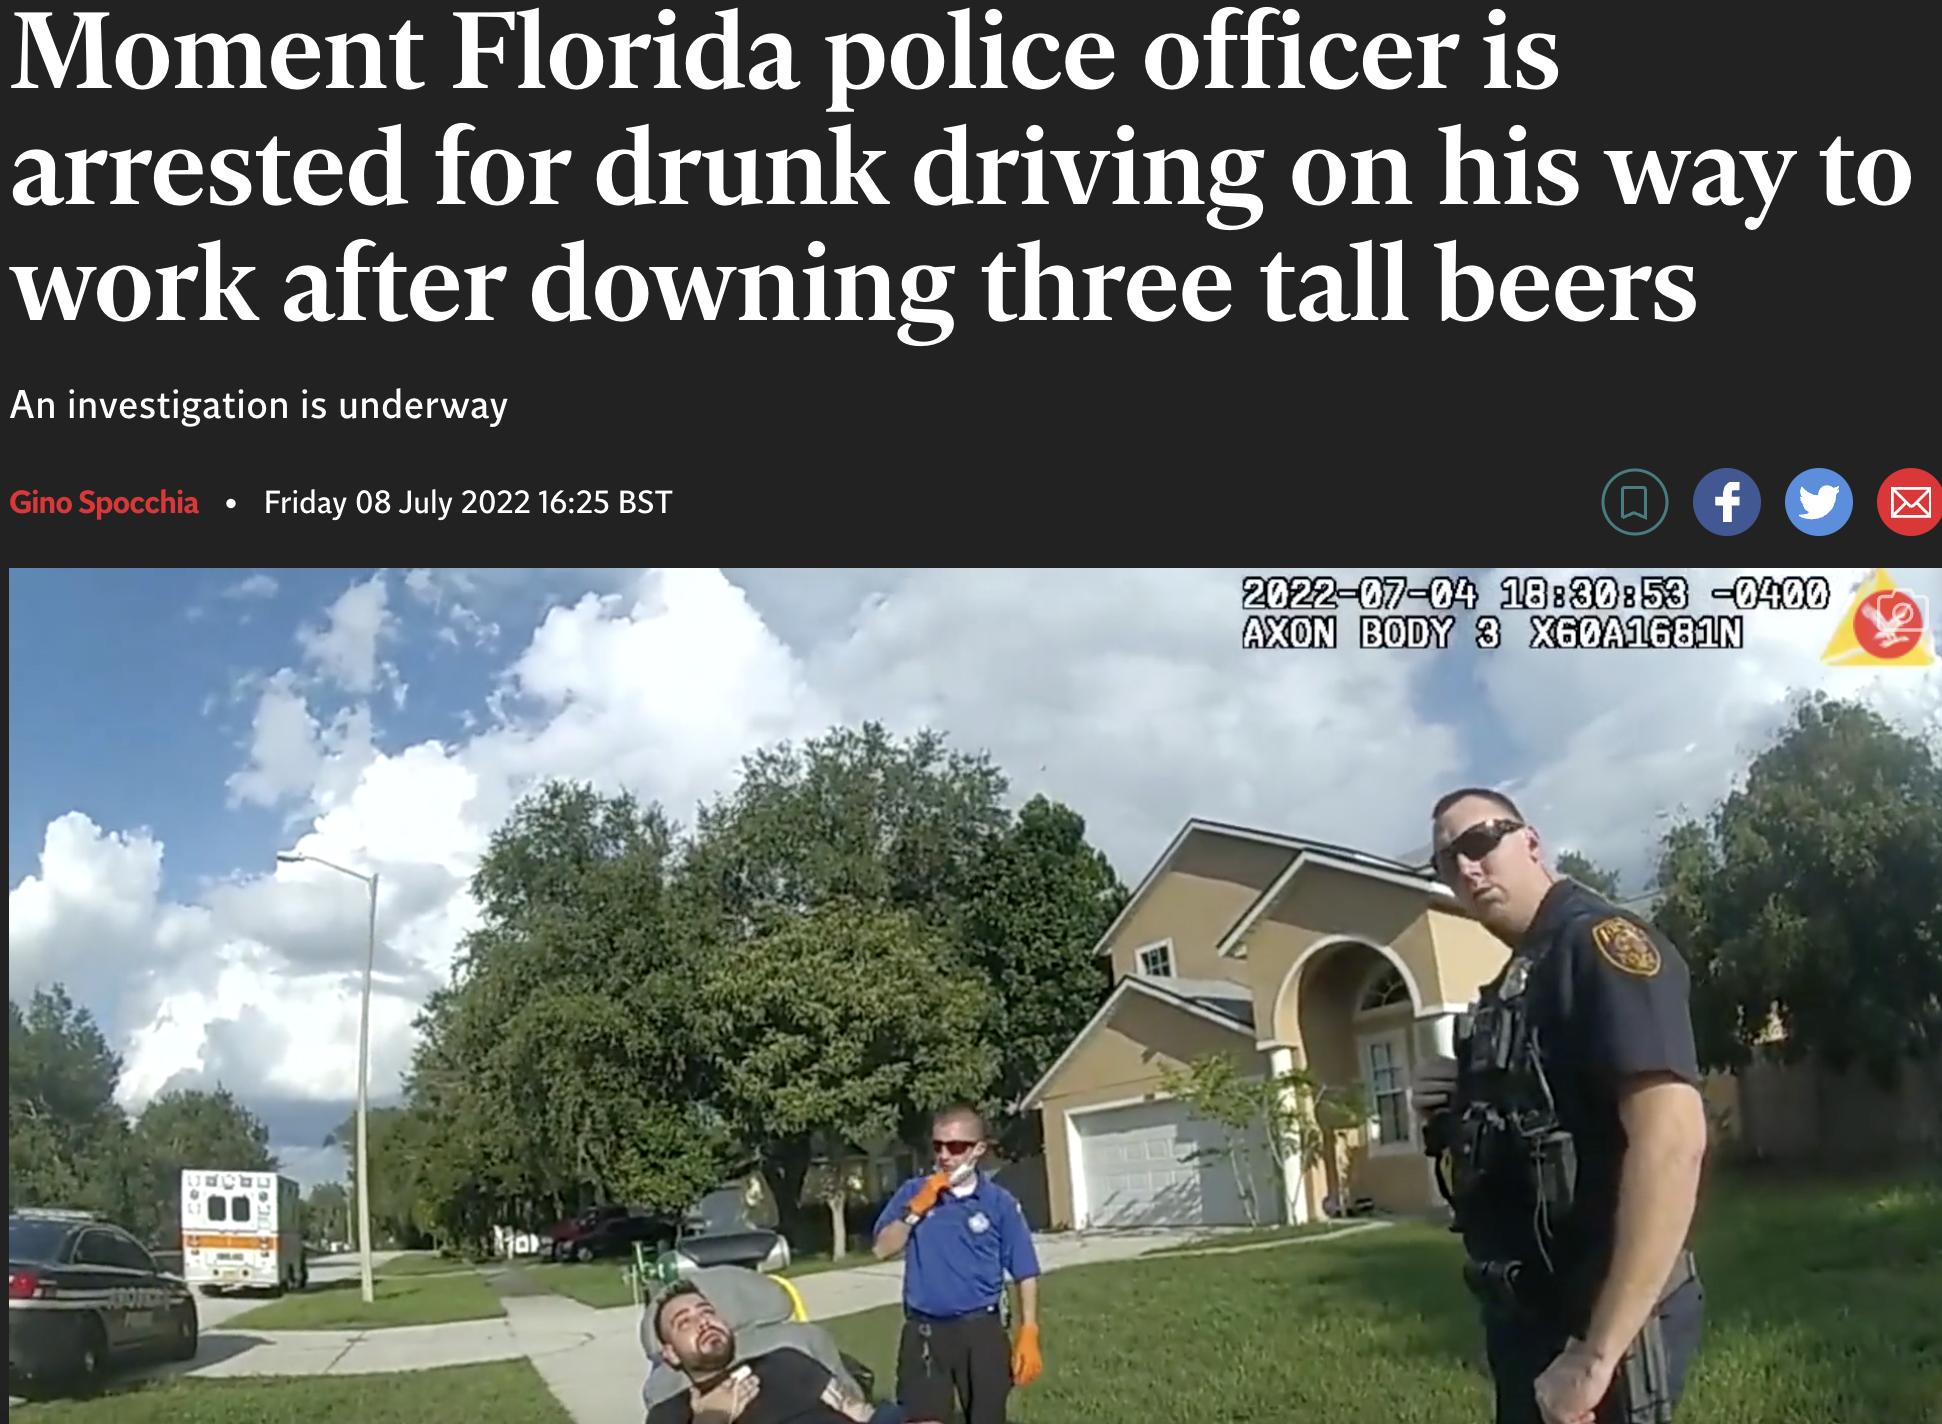 grass - Moment Florida police officer is arrested for drunk driving on his way to work after downing three tall beers An investigation is underway Gino Spocchia Friday Bst Of 53 0400 Axon Body 3 X60A1681N